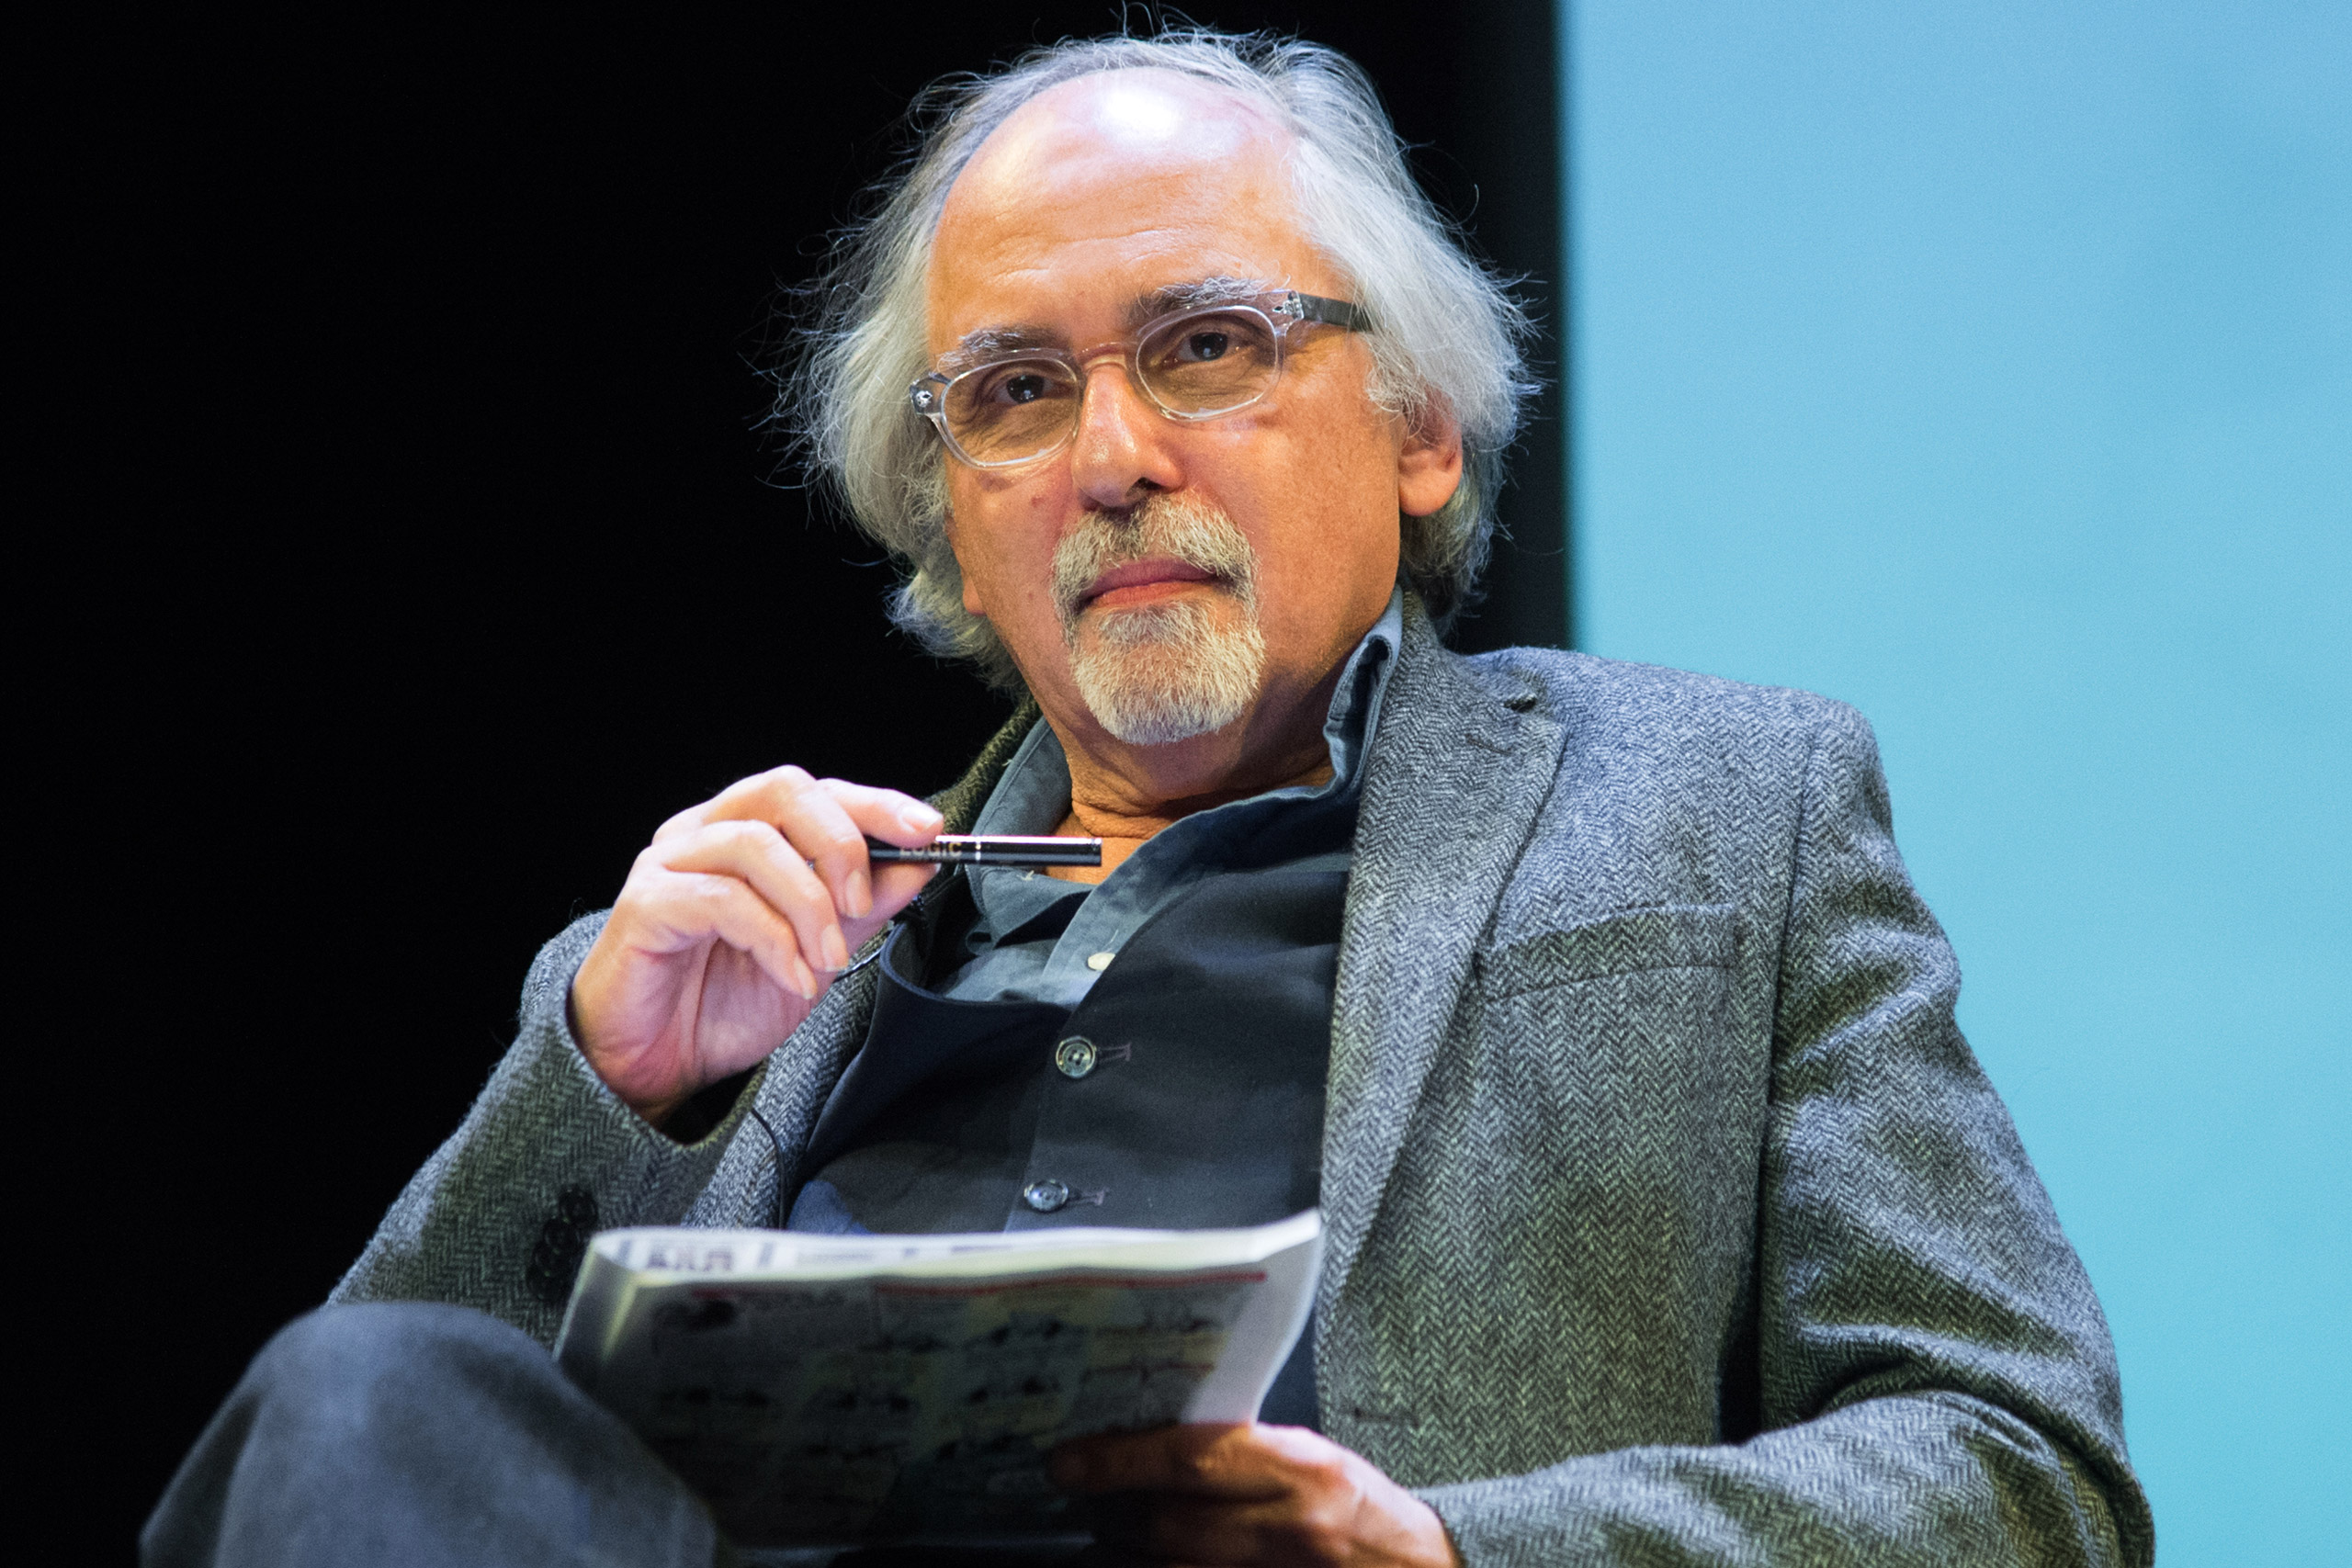 Cartoonist Art Spiegelman attends the French Institute Alliance Francaise's "After Charlie: What's Next for Art, Satire and Censorship" at Florence Gould Hall on Feb. 19, 2015 in New York City.